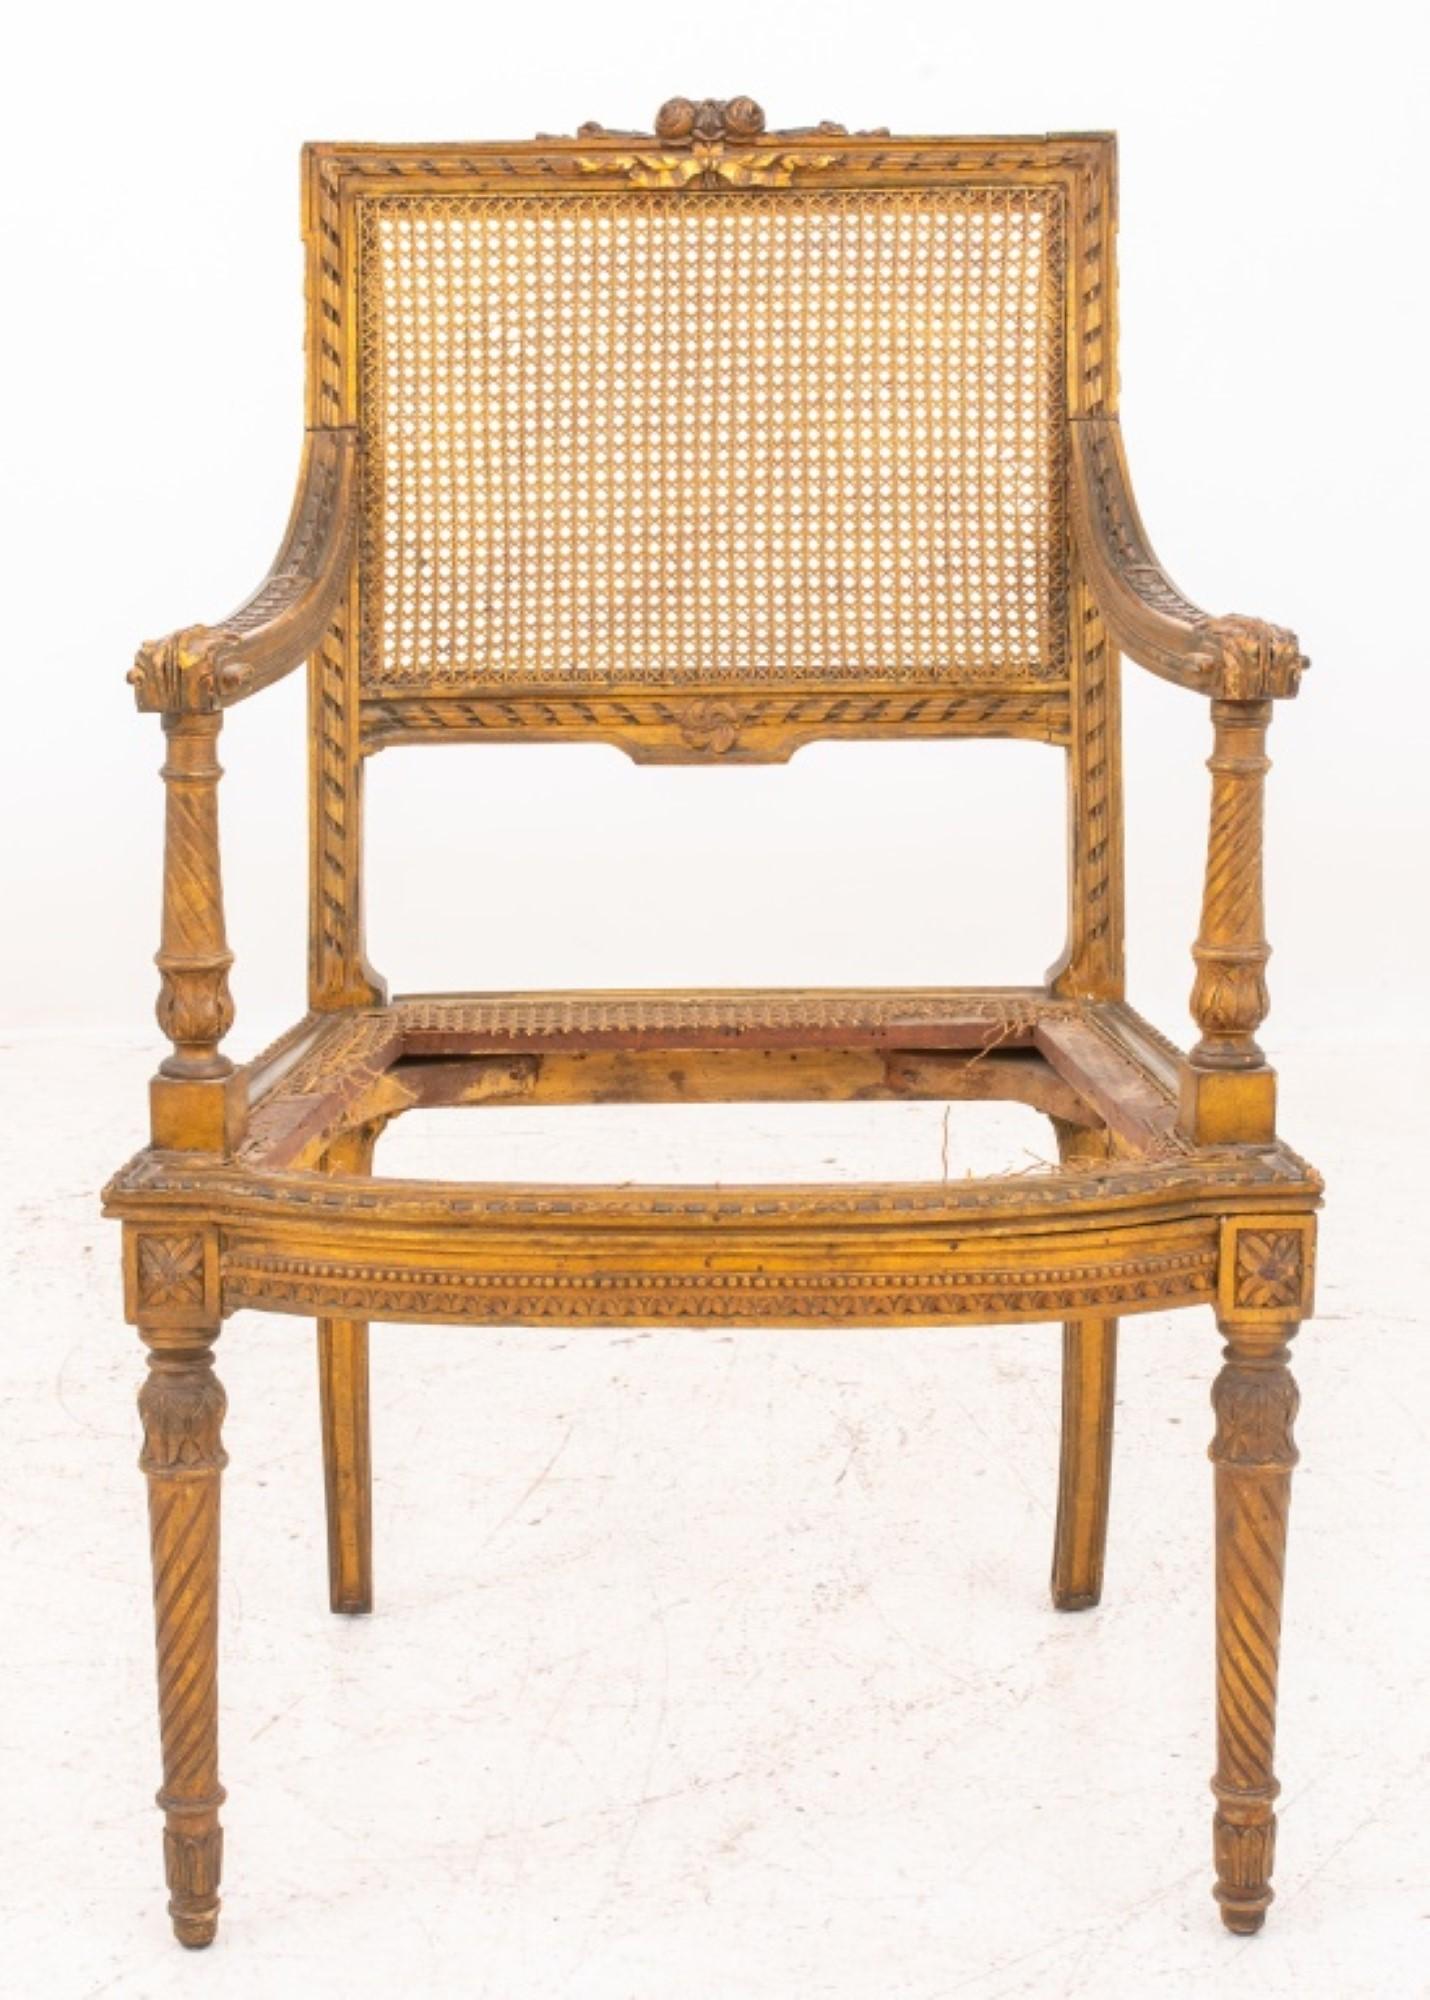 Louis XVI style carved giltwood armchair  raised on turned tapered legs, back and seat  caned, seat caning in distress condition,  circa late nineteenth century. 

Dealer: S138XX